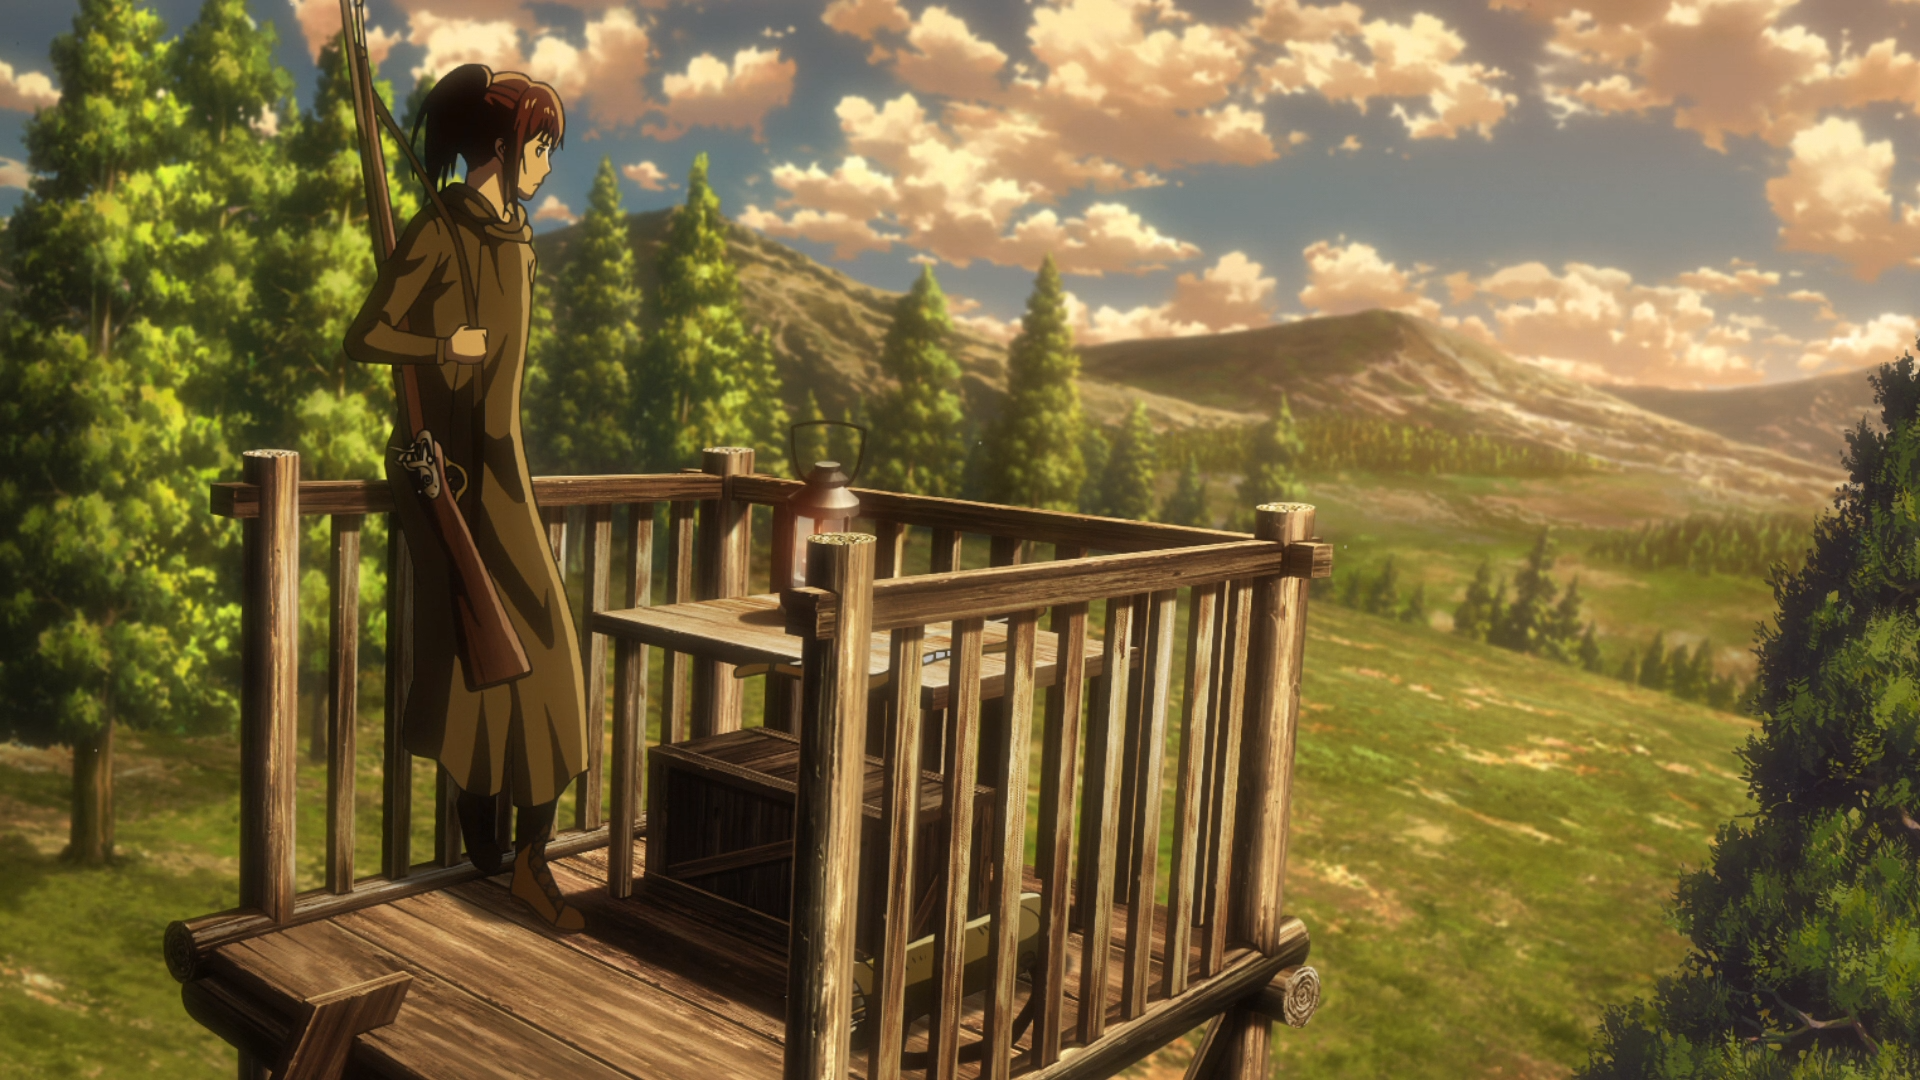 attack on titan landscape Wallpapers